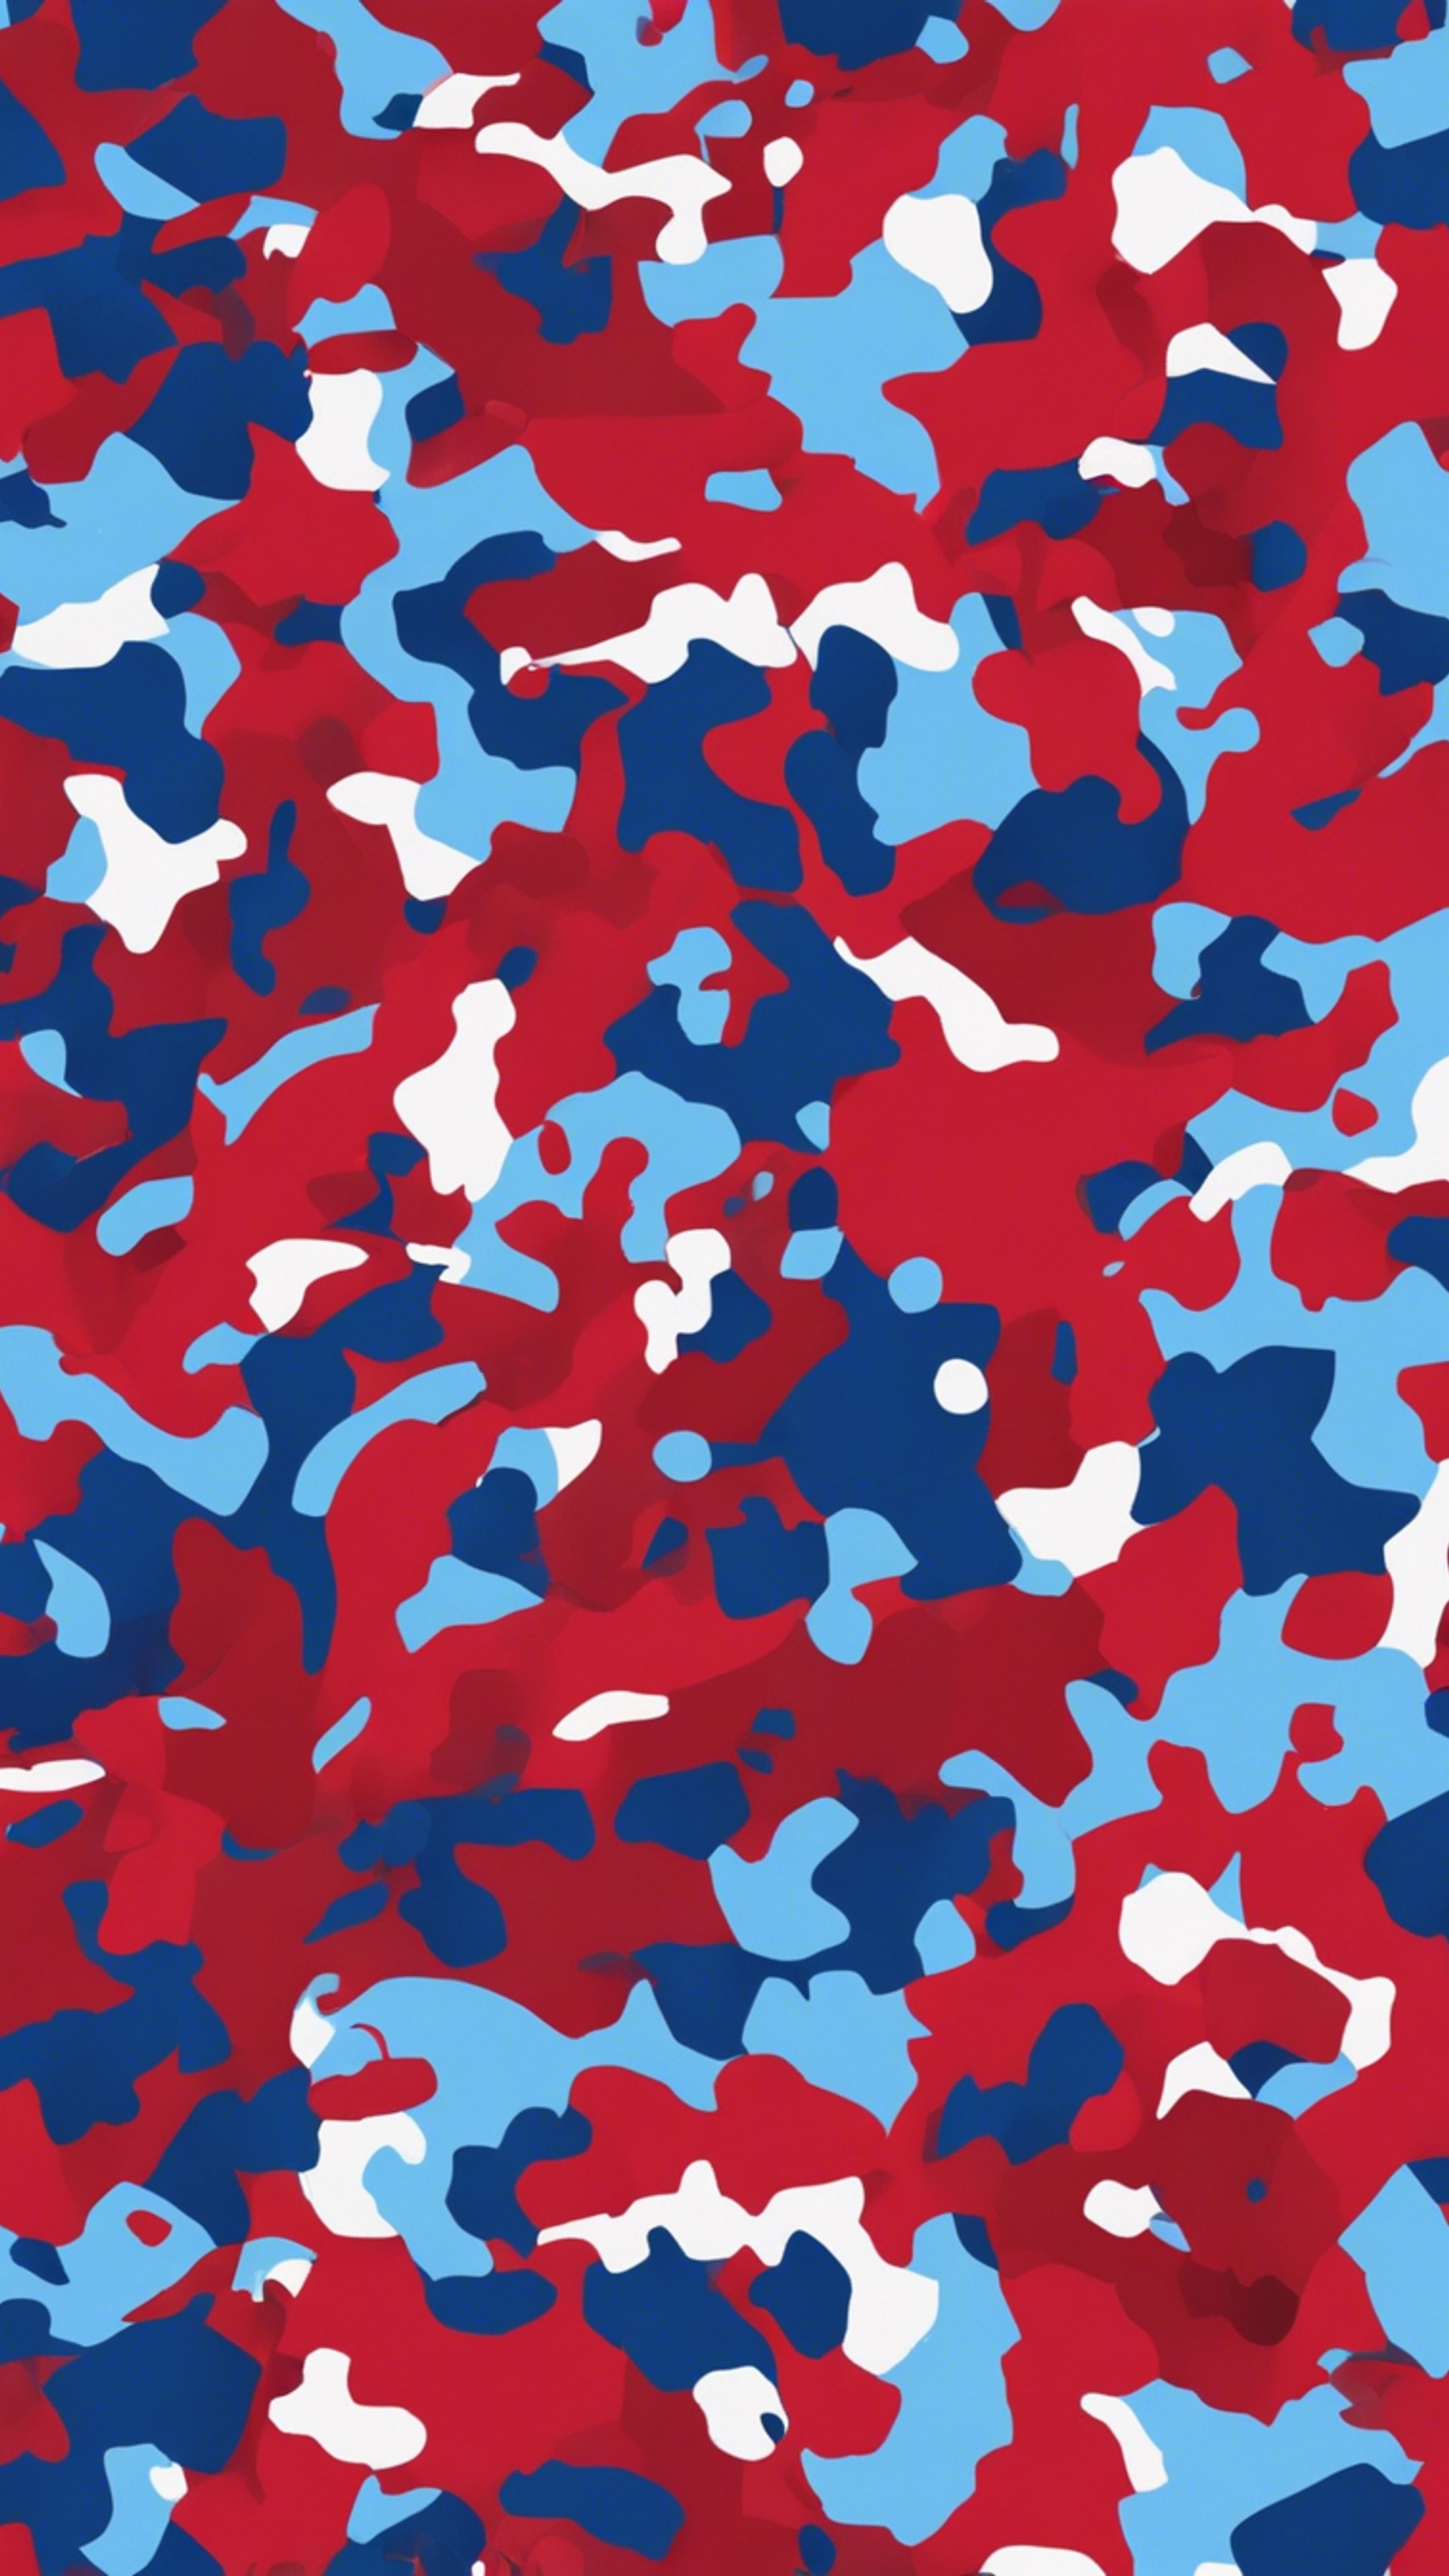 Camouflage pattern in shades of red and blue distributed randomly. Tapeta[29e12ceb4fee465f920c]